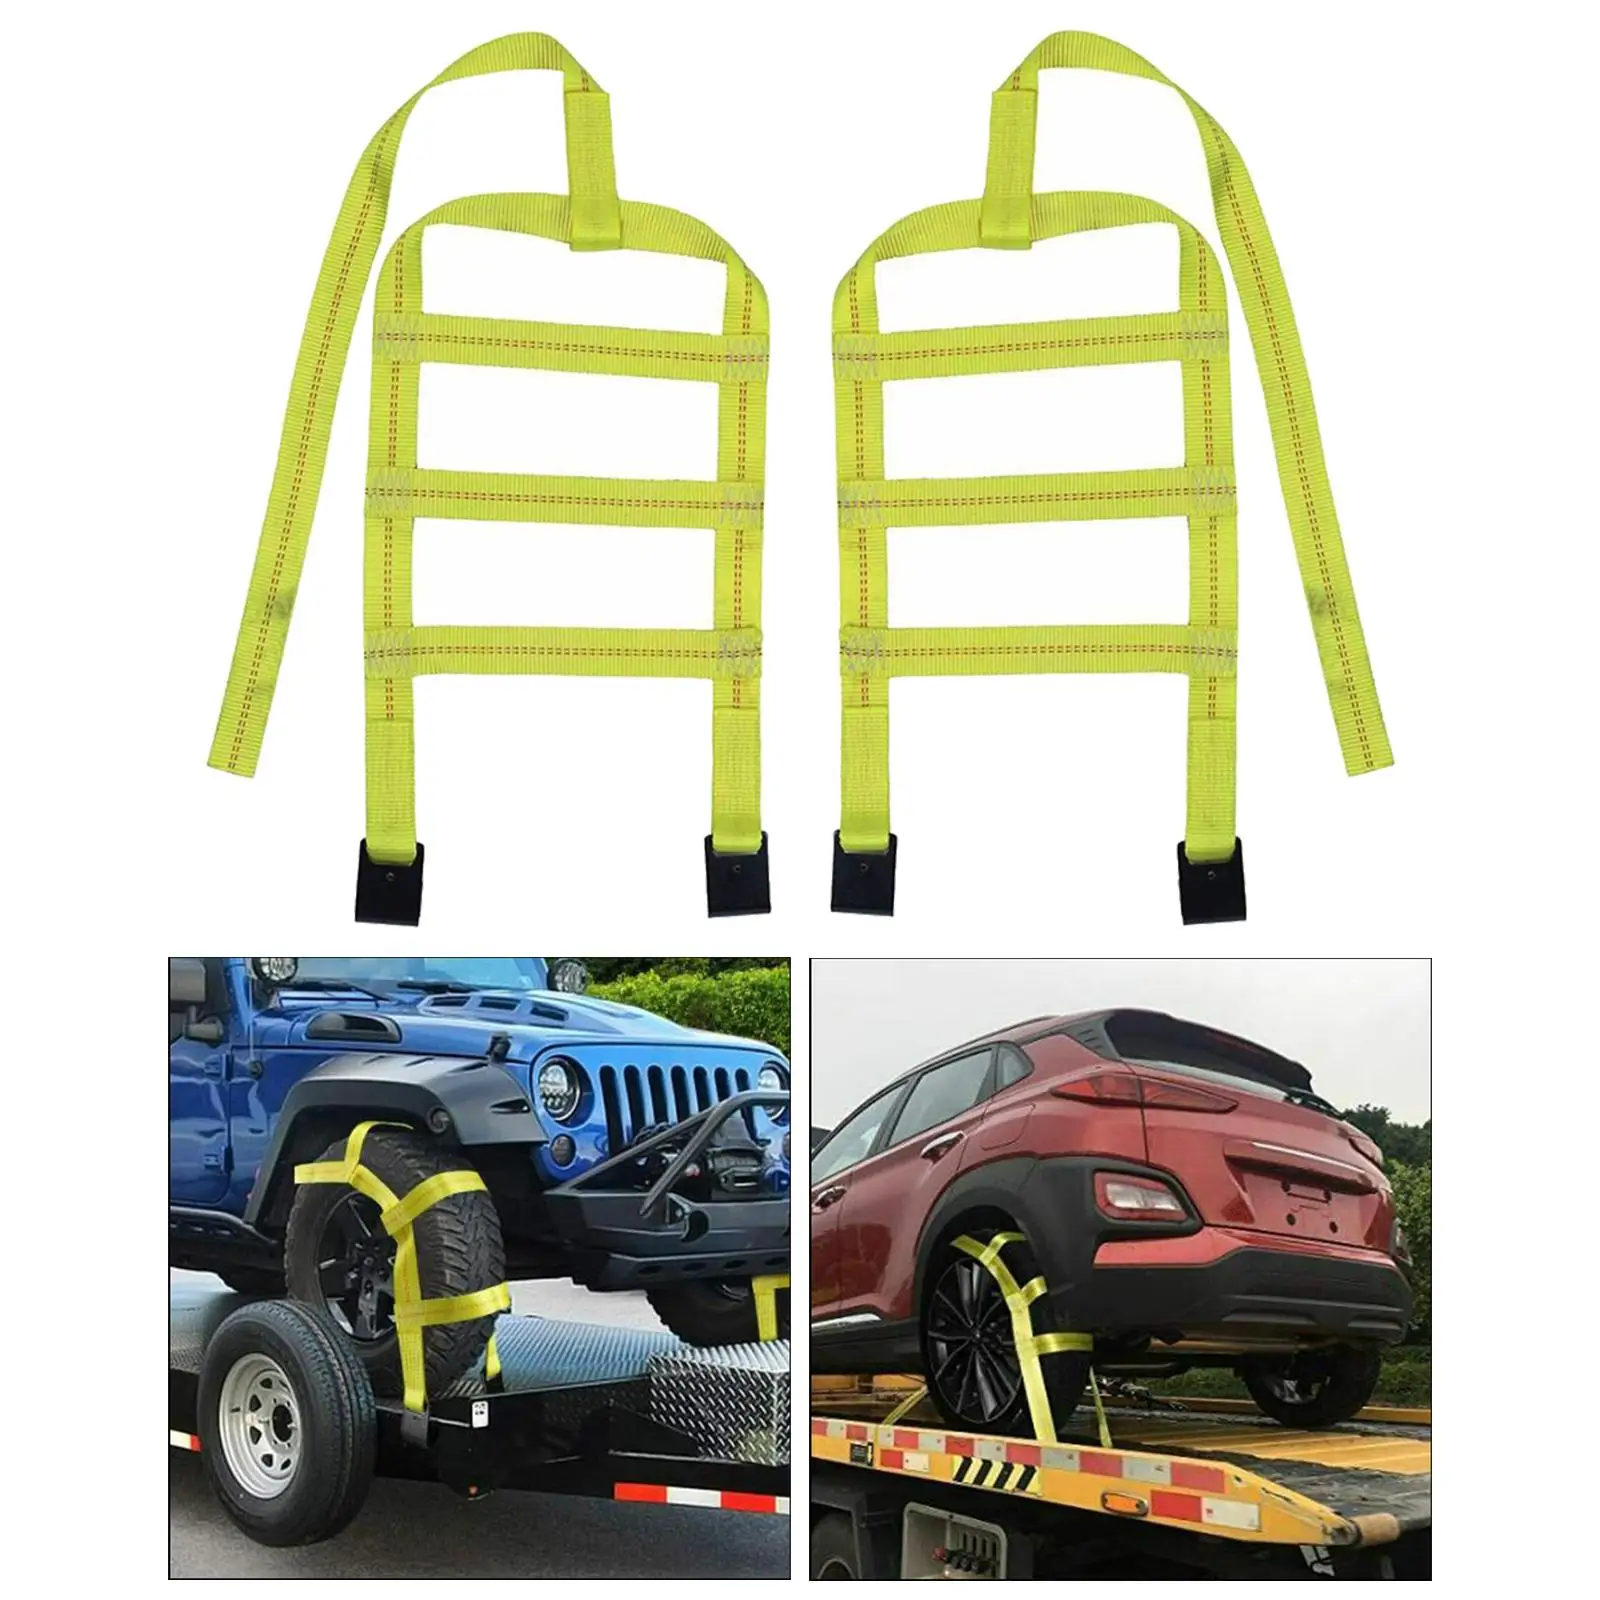 Tow Straps Net Basket with Flat Hooks Yellow Car Tire Tow Straps Car Basket